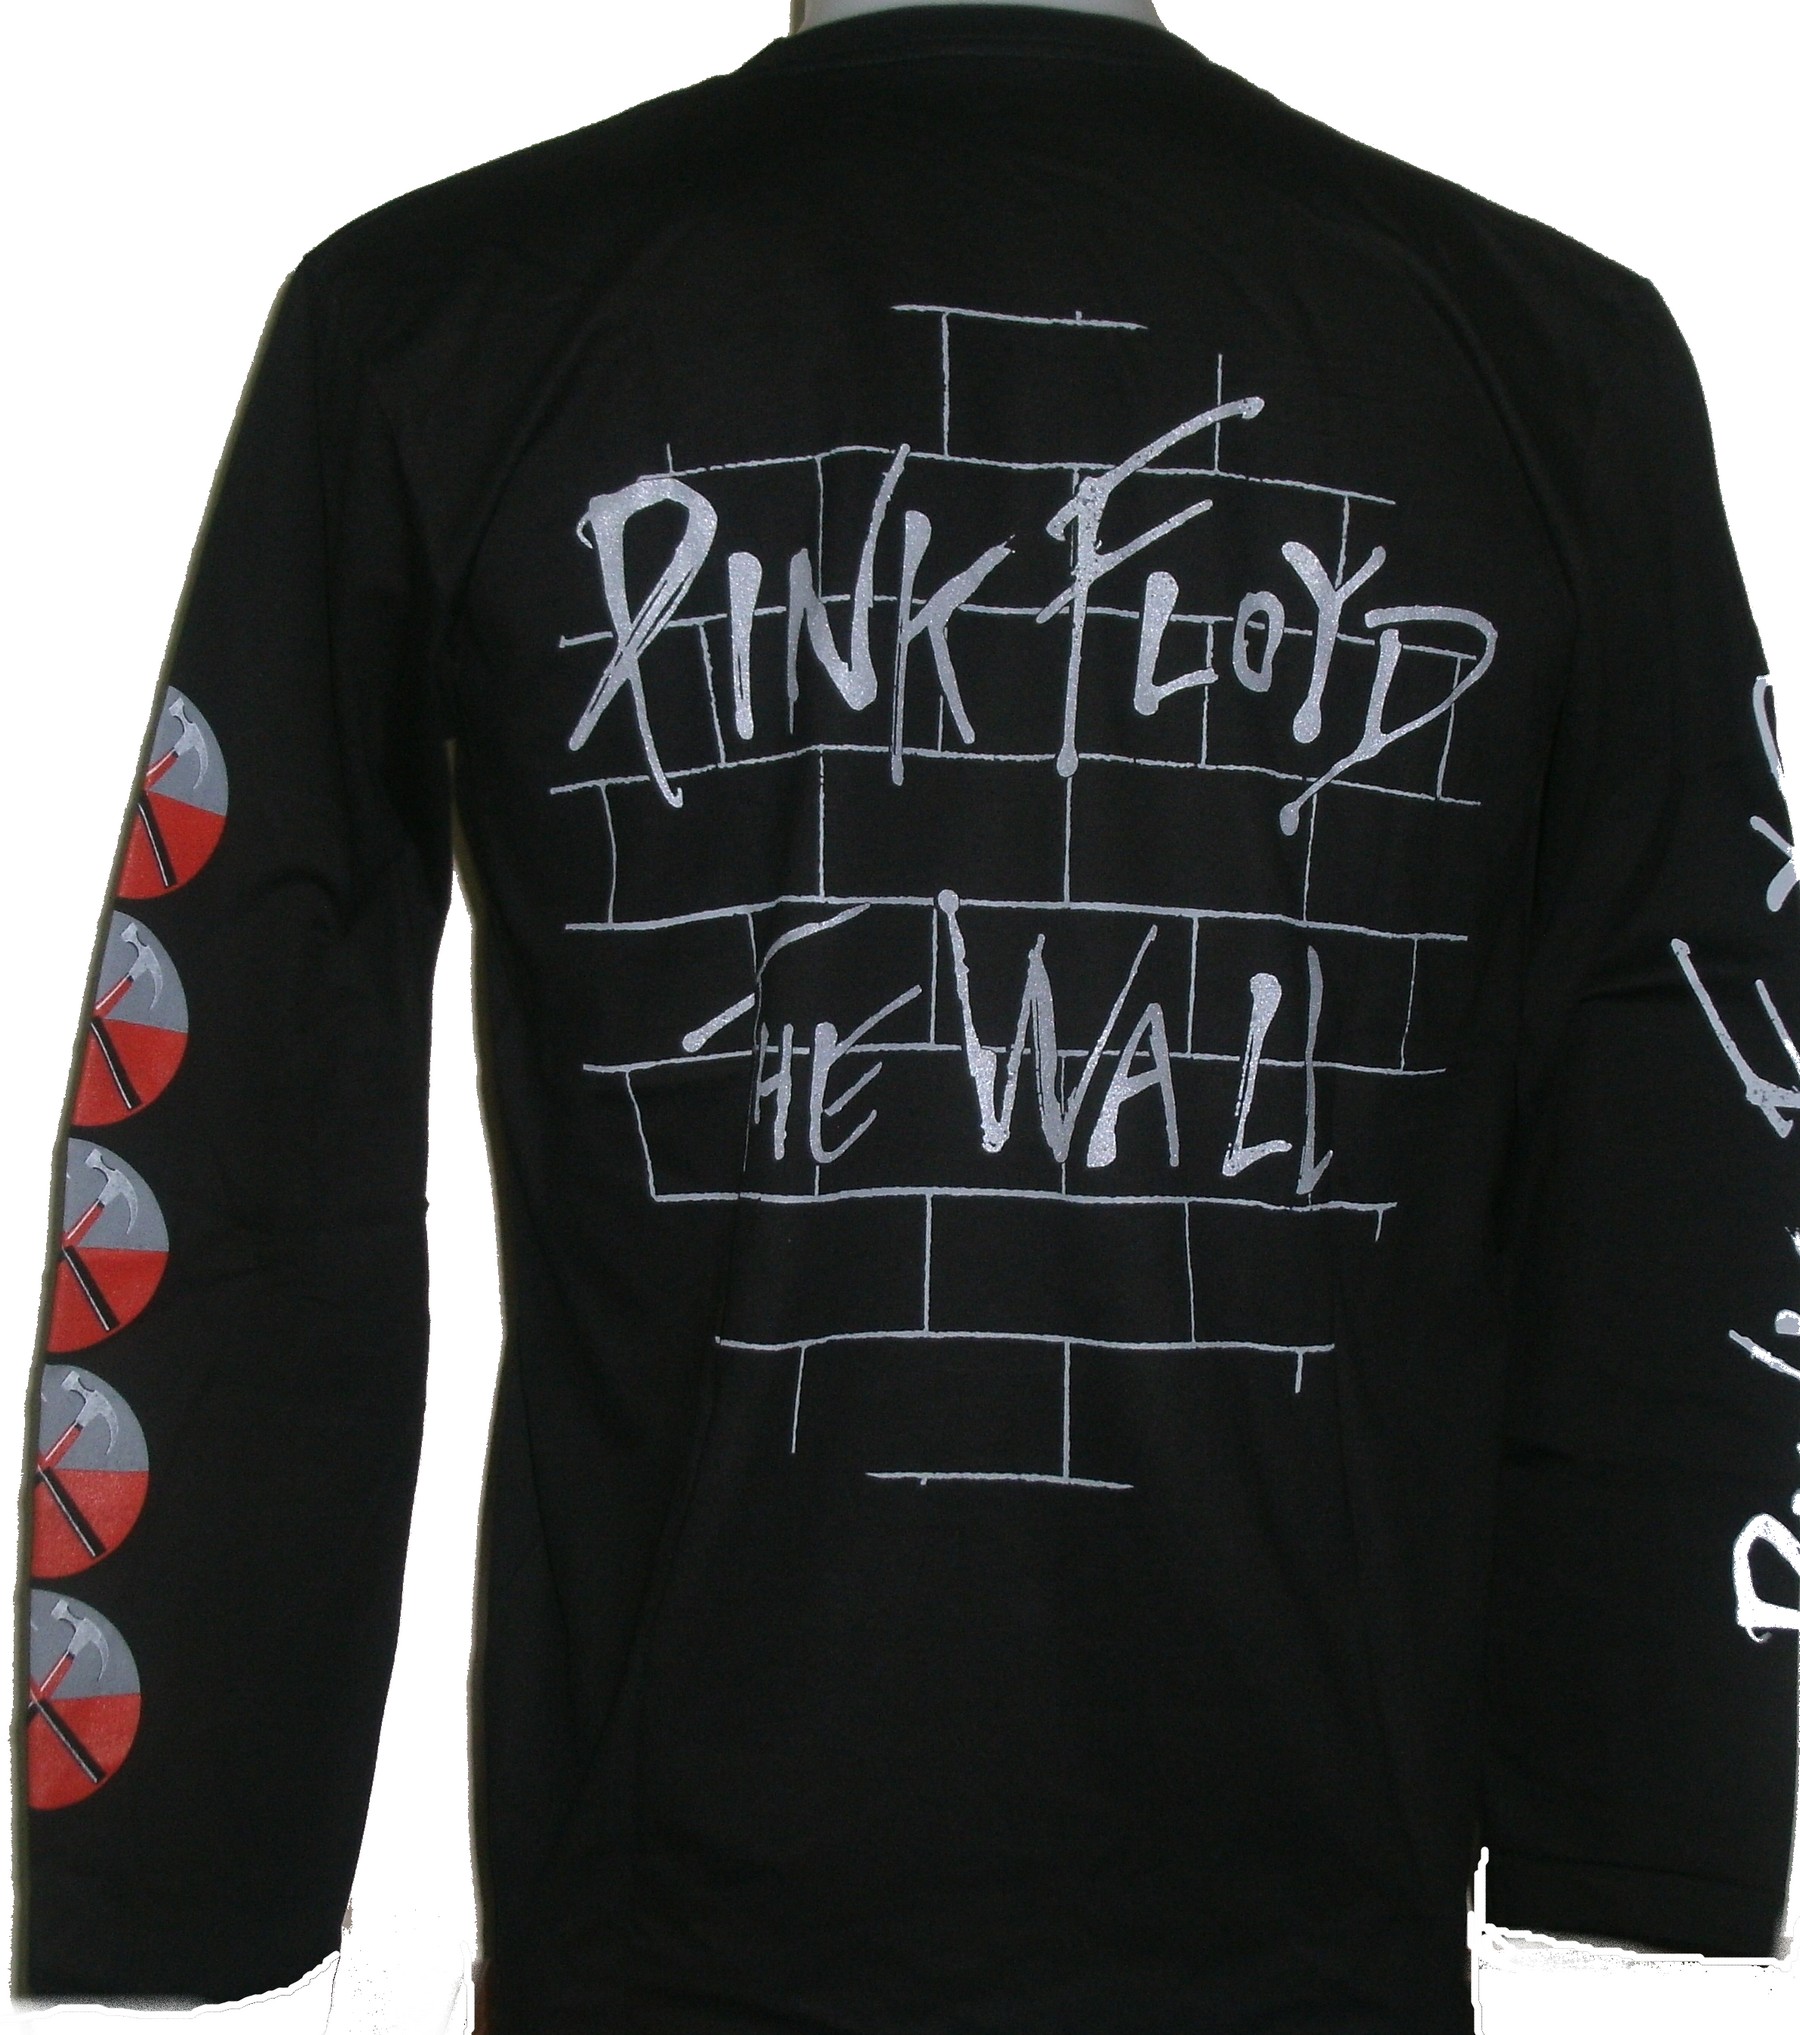 Pink Floyd long-sleeved t-shirt The Wall size XL